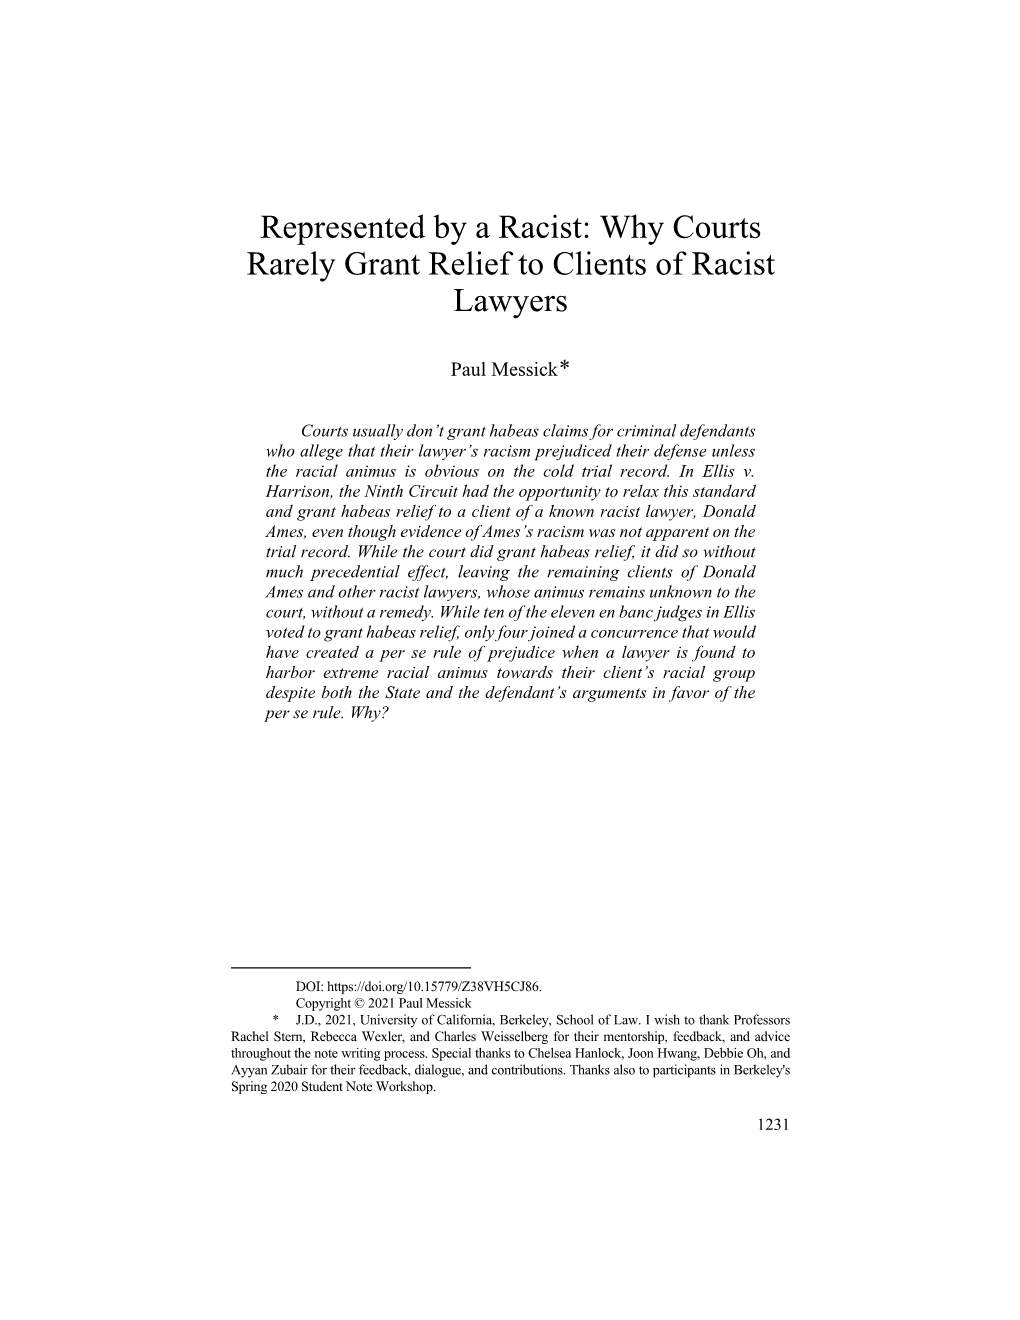 Why Courts Rarely Grant Relief to Clients of Racist Lawyers